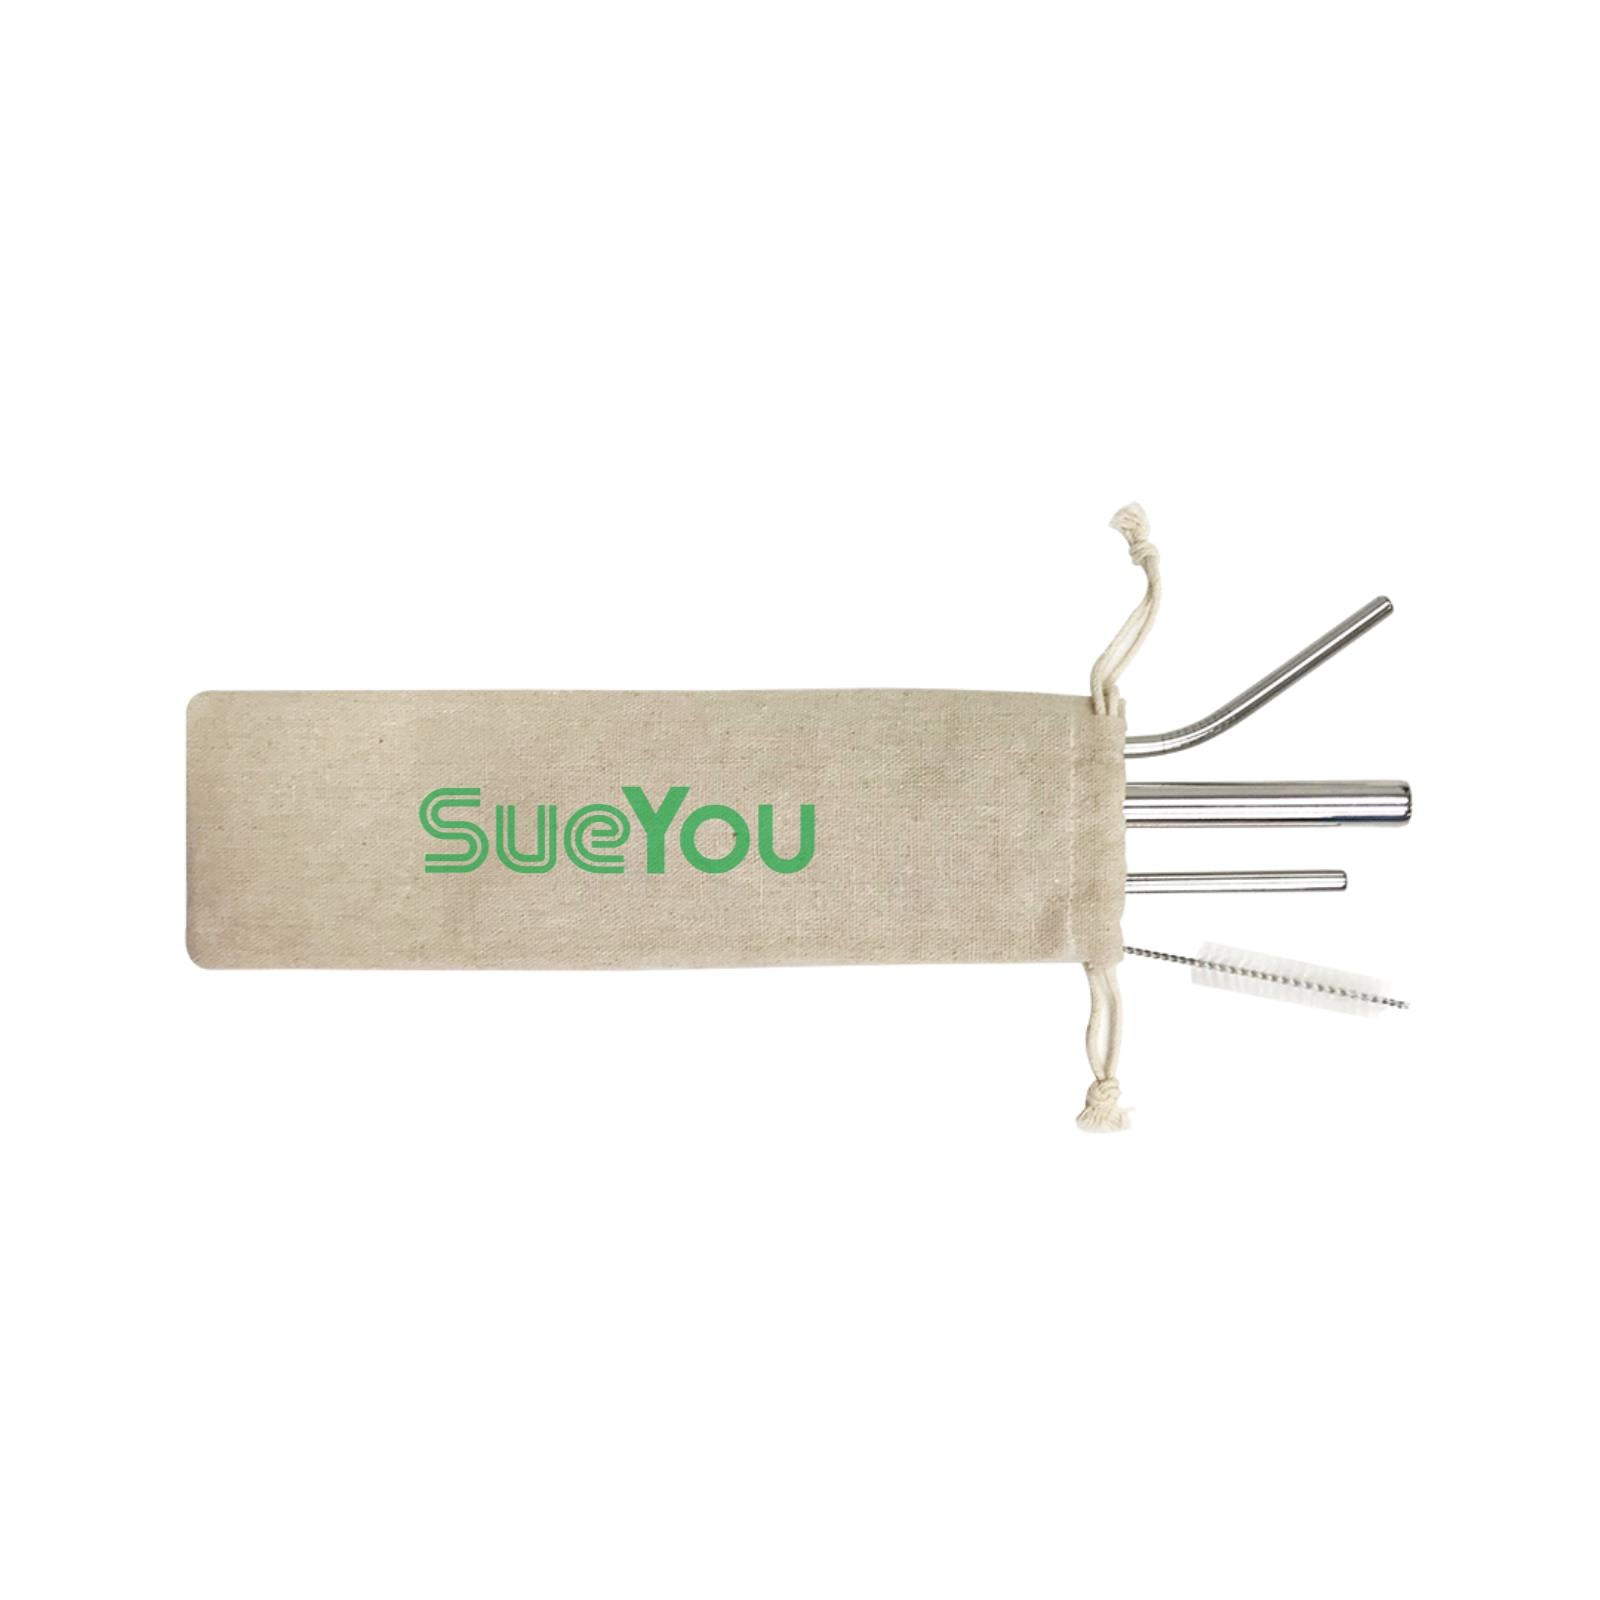 Slang Statement SueYou 4-in-1 Stainless Steel Straw Set In a Satchel